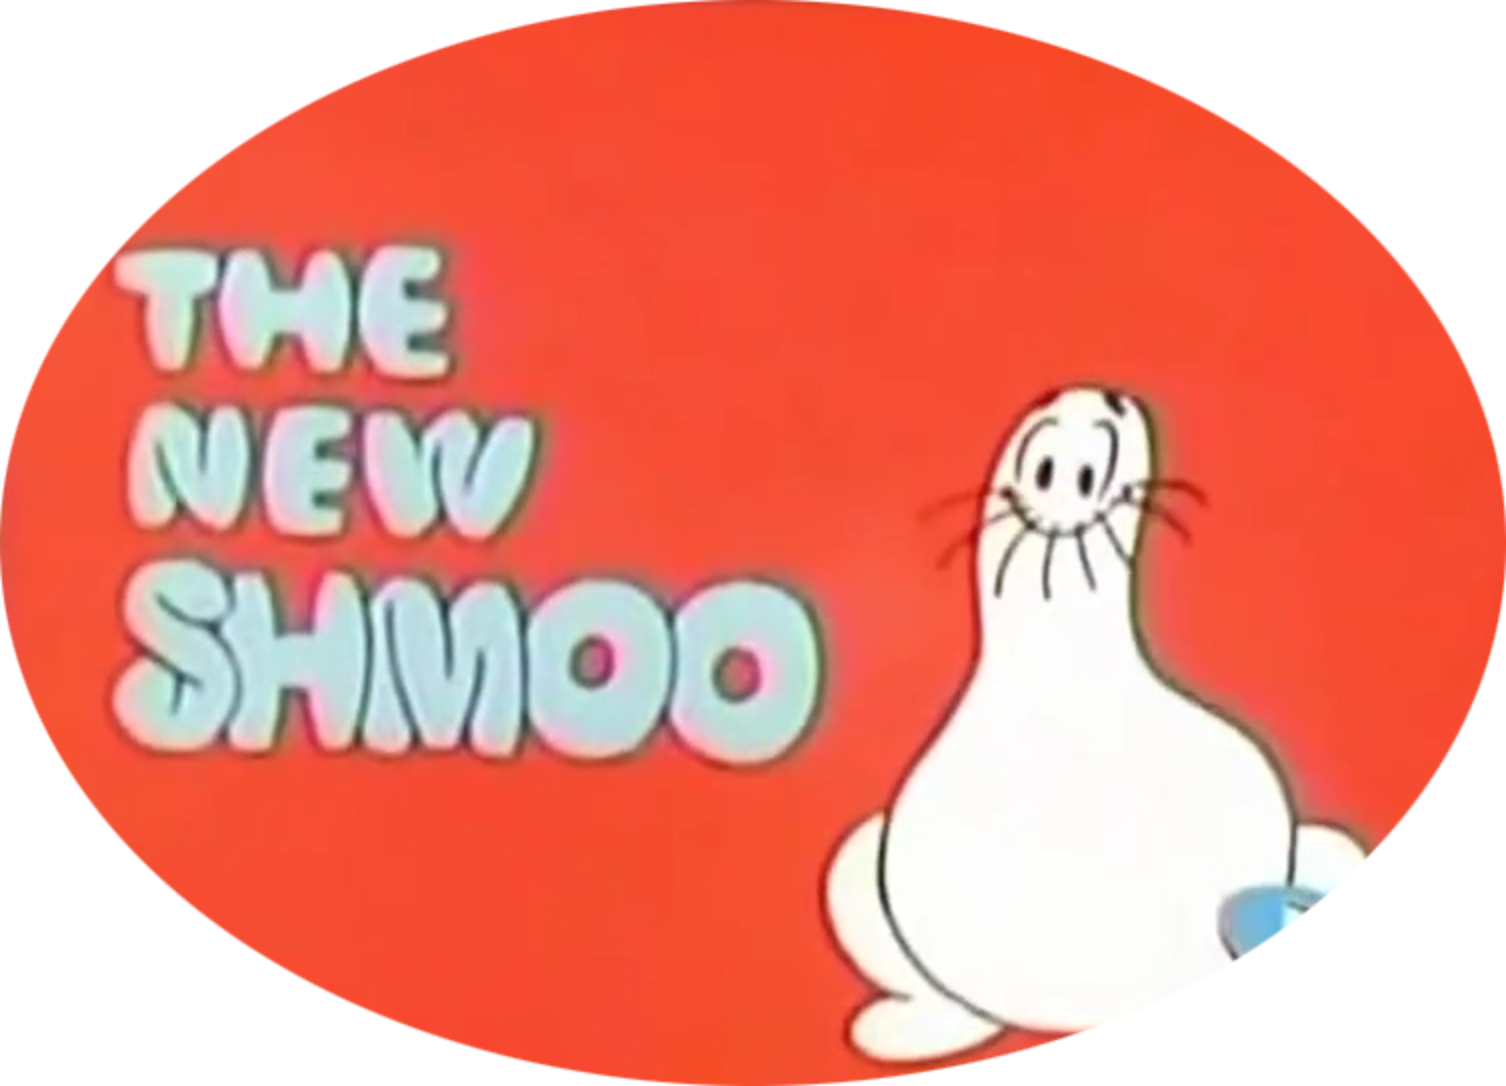 The New Shmoo Complete (2 DVDs Box Set)